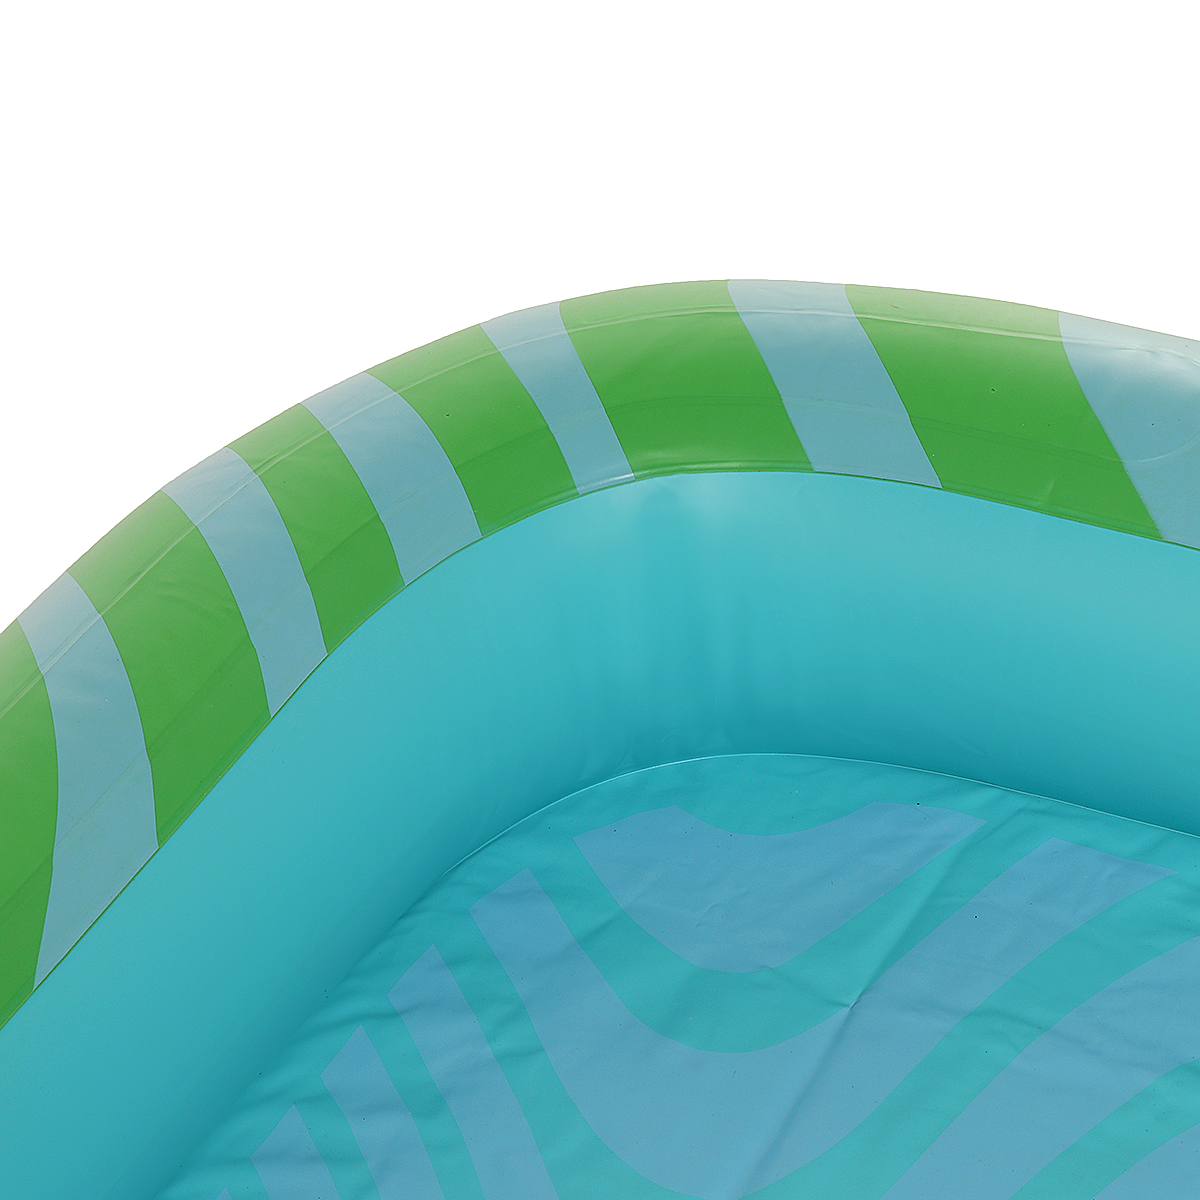 PVC-Children-Inflatable-Swimming-Pool-Sprinkler-Pool-Thickened-Cartoon-Pattern-Outdoor-Swimming-Wate-1851764-18